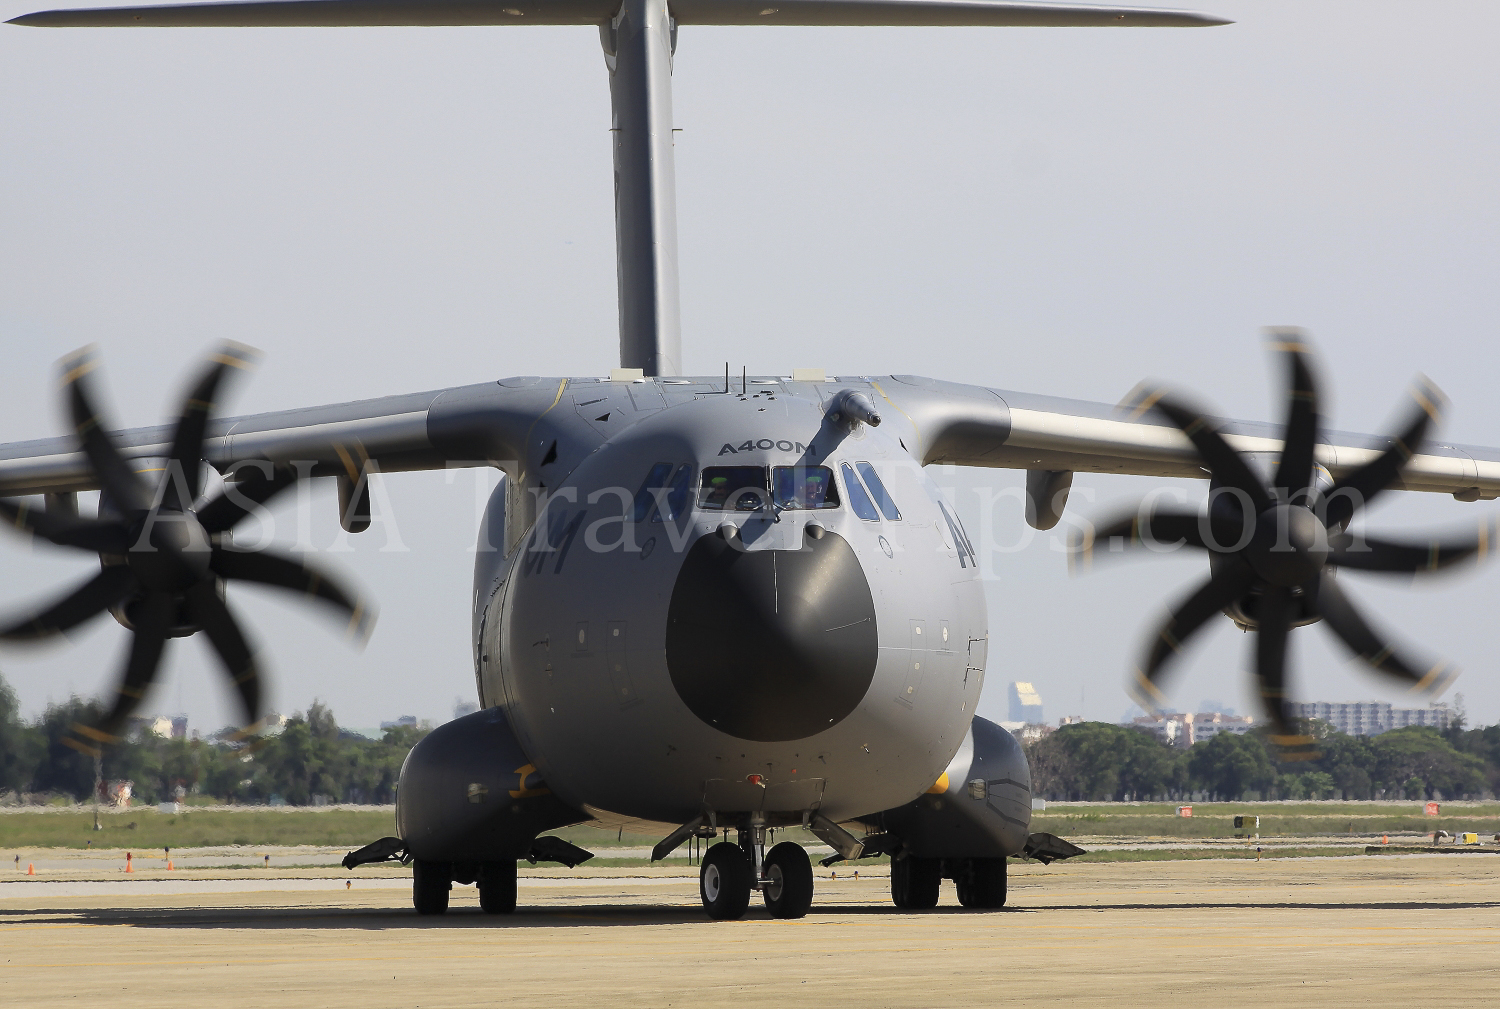 Airbus A400M Grizzly 4. Click to enlarge.